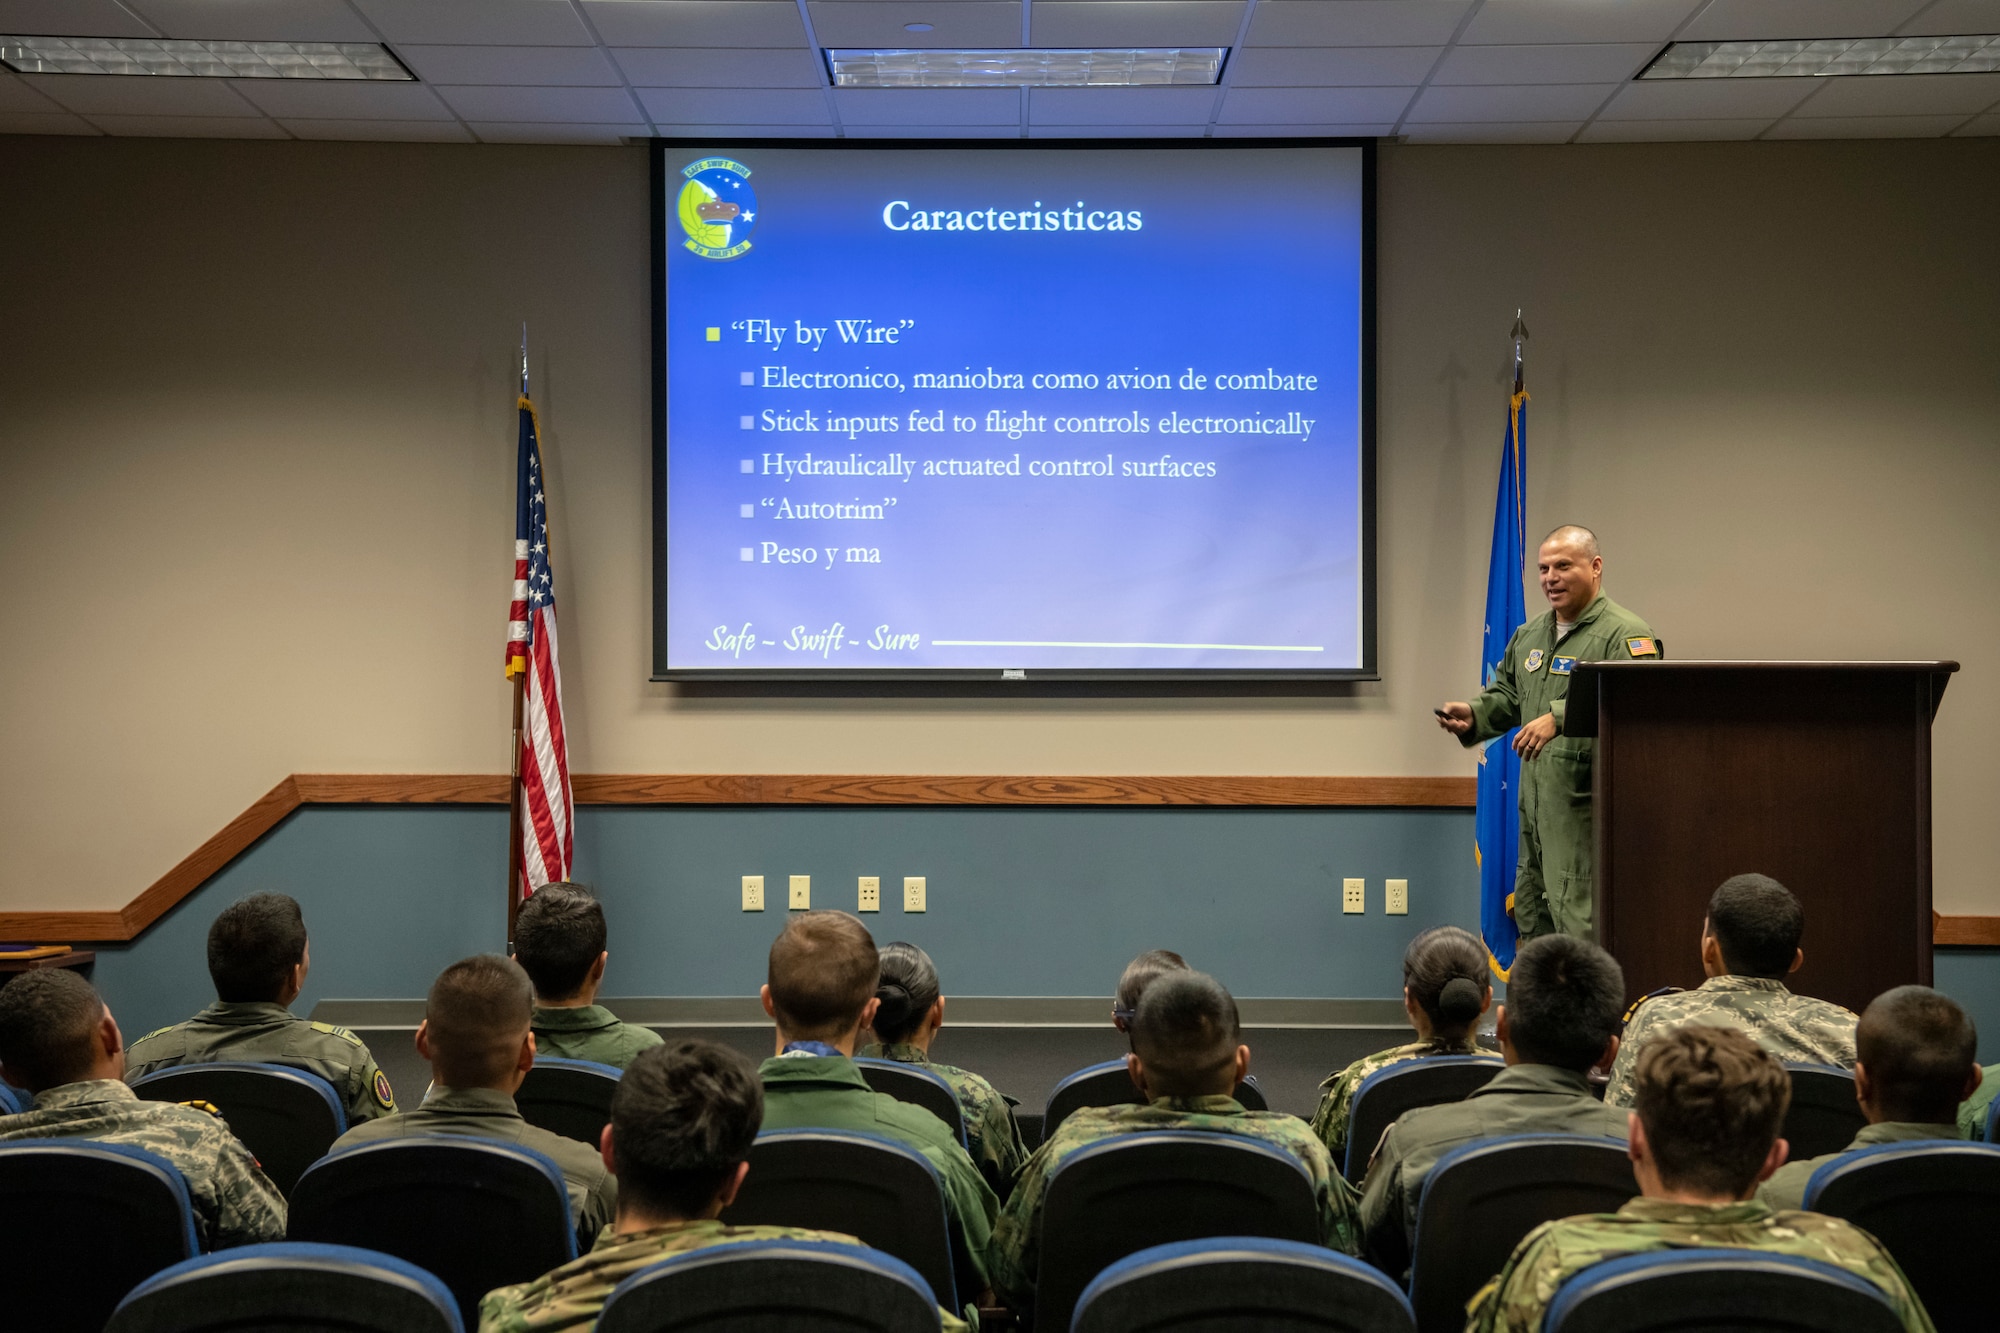 Master Sgt. Levy Menjivarsanchez, 3rd Airlift Wing loadmaster, briefs the Latin American cadets as part of their tour Oct. 17, 2019, at Dover Air Force Base, Del. The informational slides for the brief on the C-17 Globemaster III were in Spanish to accommodate the cadets. (U.S. Air Force photo by Senior Airman Christopher Quail)